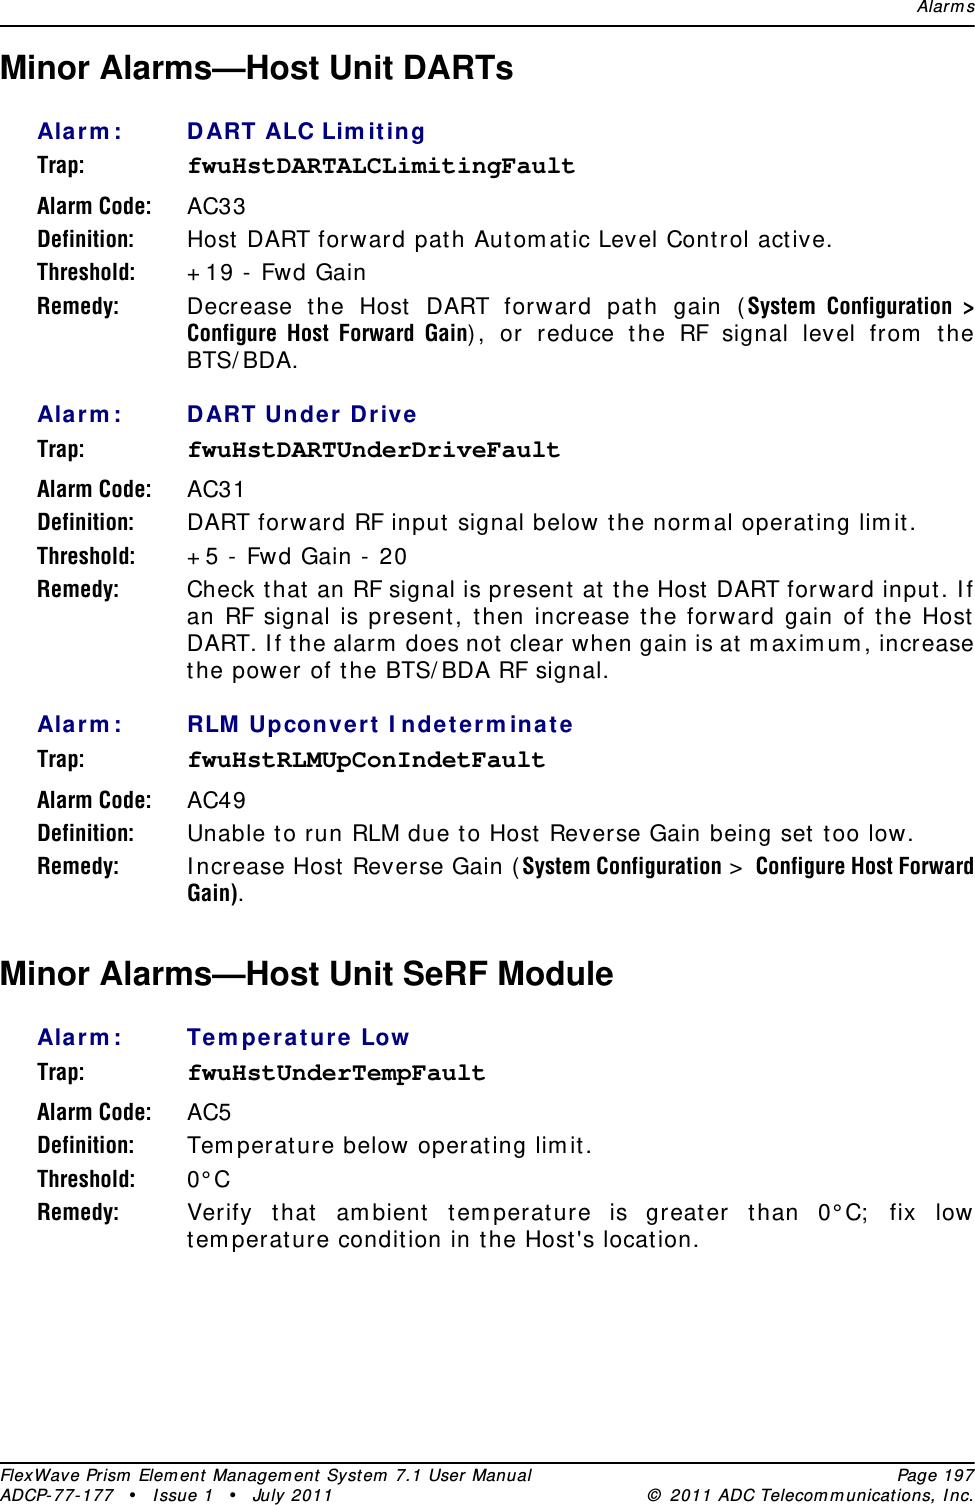 Alar m sFlexWave Prism  Elem ent Managem ent  Syst em  7.1 User Manual Page 197ADCP- 77- 177  • I ssue 1 • July 2011 ©  2011 ADC Telecom m unicat ions, I nc.Minor Alarms—Host Unit DARTs Ala rm : DART ALC Lim it ingTrap: fwuHstDARTALCLimitingFaultAlarm Code: AC33Definition: Host  DART forward path Aut om atic Level Cont rol act ive.Threshold: + 19 -  Fwd GainRemedy: Decrease t he Host  DART forward path gain (System Configuration &gt; Configure Host Forward Gain) , or reduce the RF signal level from  t he BTS/ BDA.Ala rm : DART Un der Dr iveTrap: fwuHstDARTUnderDriveFaultAlarm Code: AC31Definition: DART forward RF input  signal below the norm al operat ing lim it.Threshold: + 5 -  Fwd Gain -  20Remedy: Check t hat  an RF signal is present  at t he Host DART forward input . I f an RF signal is present, t hen increase the forward gain of t he Host  DART. I f t he alarm  does not clear when gain is at m axim um , increase the power of t he BTS/ BDA RF signal.Ala rm : RLM Upconver t  I ndet er m inateTrap: fwuHstRLMUpConIndetFaultAlarm Code: AC49Definition: Unable t o run RLM due t o Host  Reverse Gain being set  too low.Remedy: I ncrease Host  Reverse Gain ( System Configuration &gt;  Configure Host Forward Gain).Minor Alarms—Host Unit SeRF ModuleAla rm : Te m pe ra t ure  LowTrap: fwuHstUnderTempFaultAlarm Code: AC5Definition: Tem perat ure below operating lim it .Threshold: 0° CRemedy: Verify that  am bient  tem perat ure is great er t han 0° C;  fix low tem perat ure condit ion in t he Host &apos;s location.